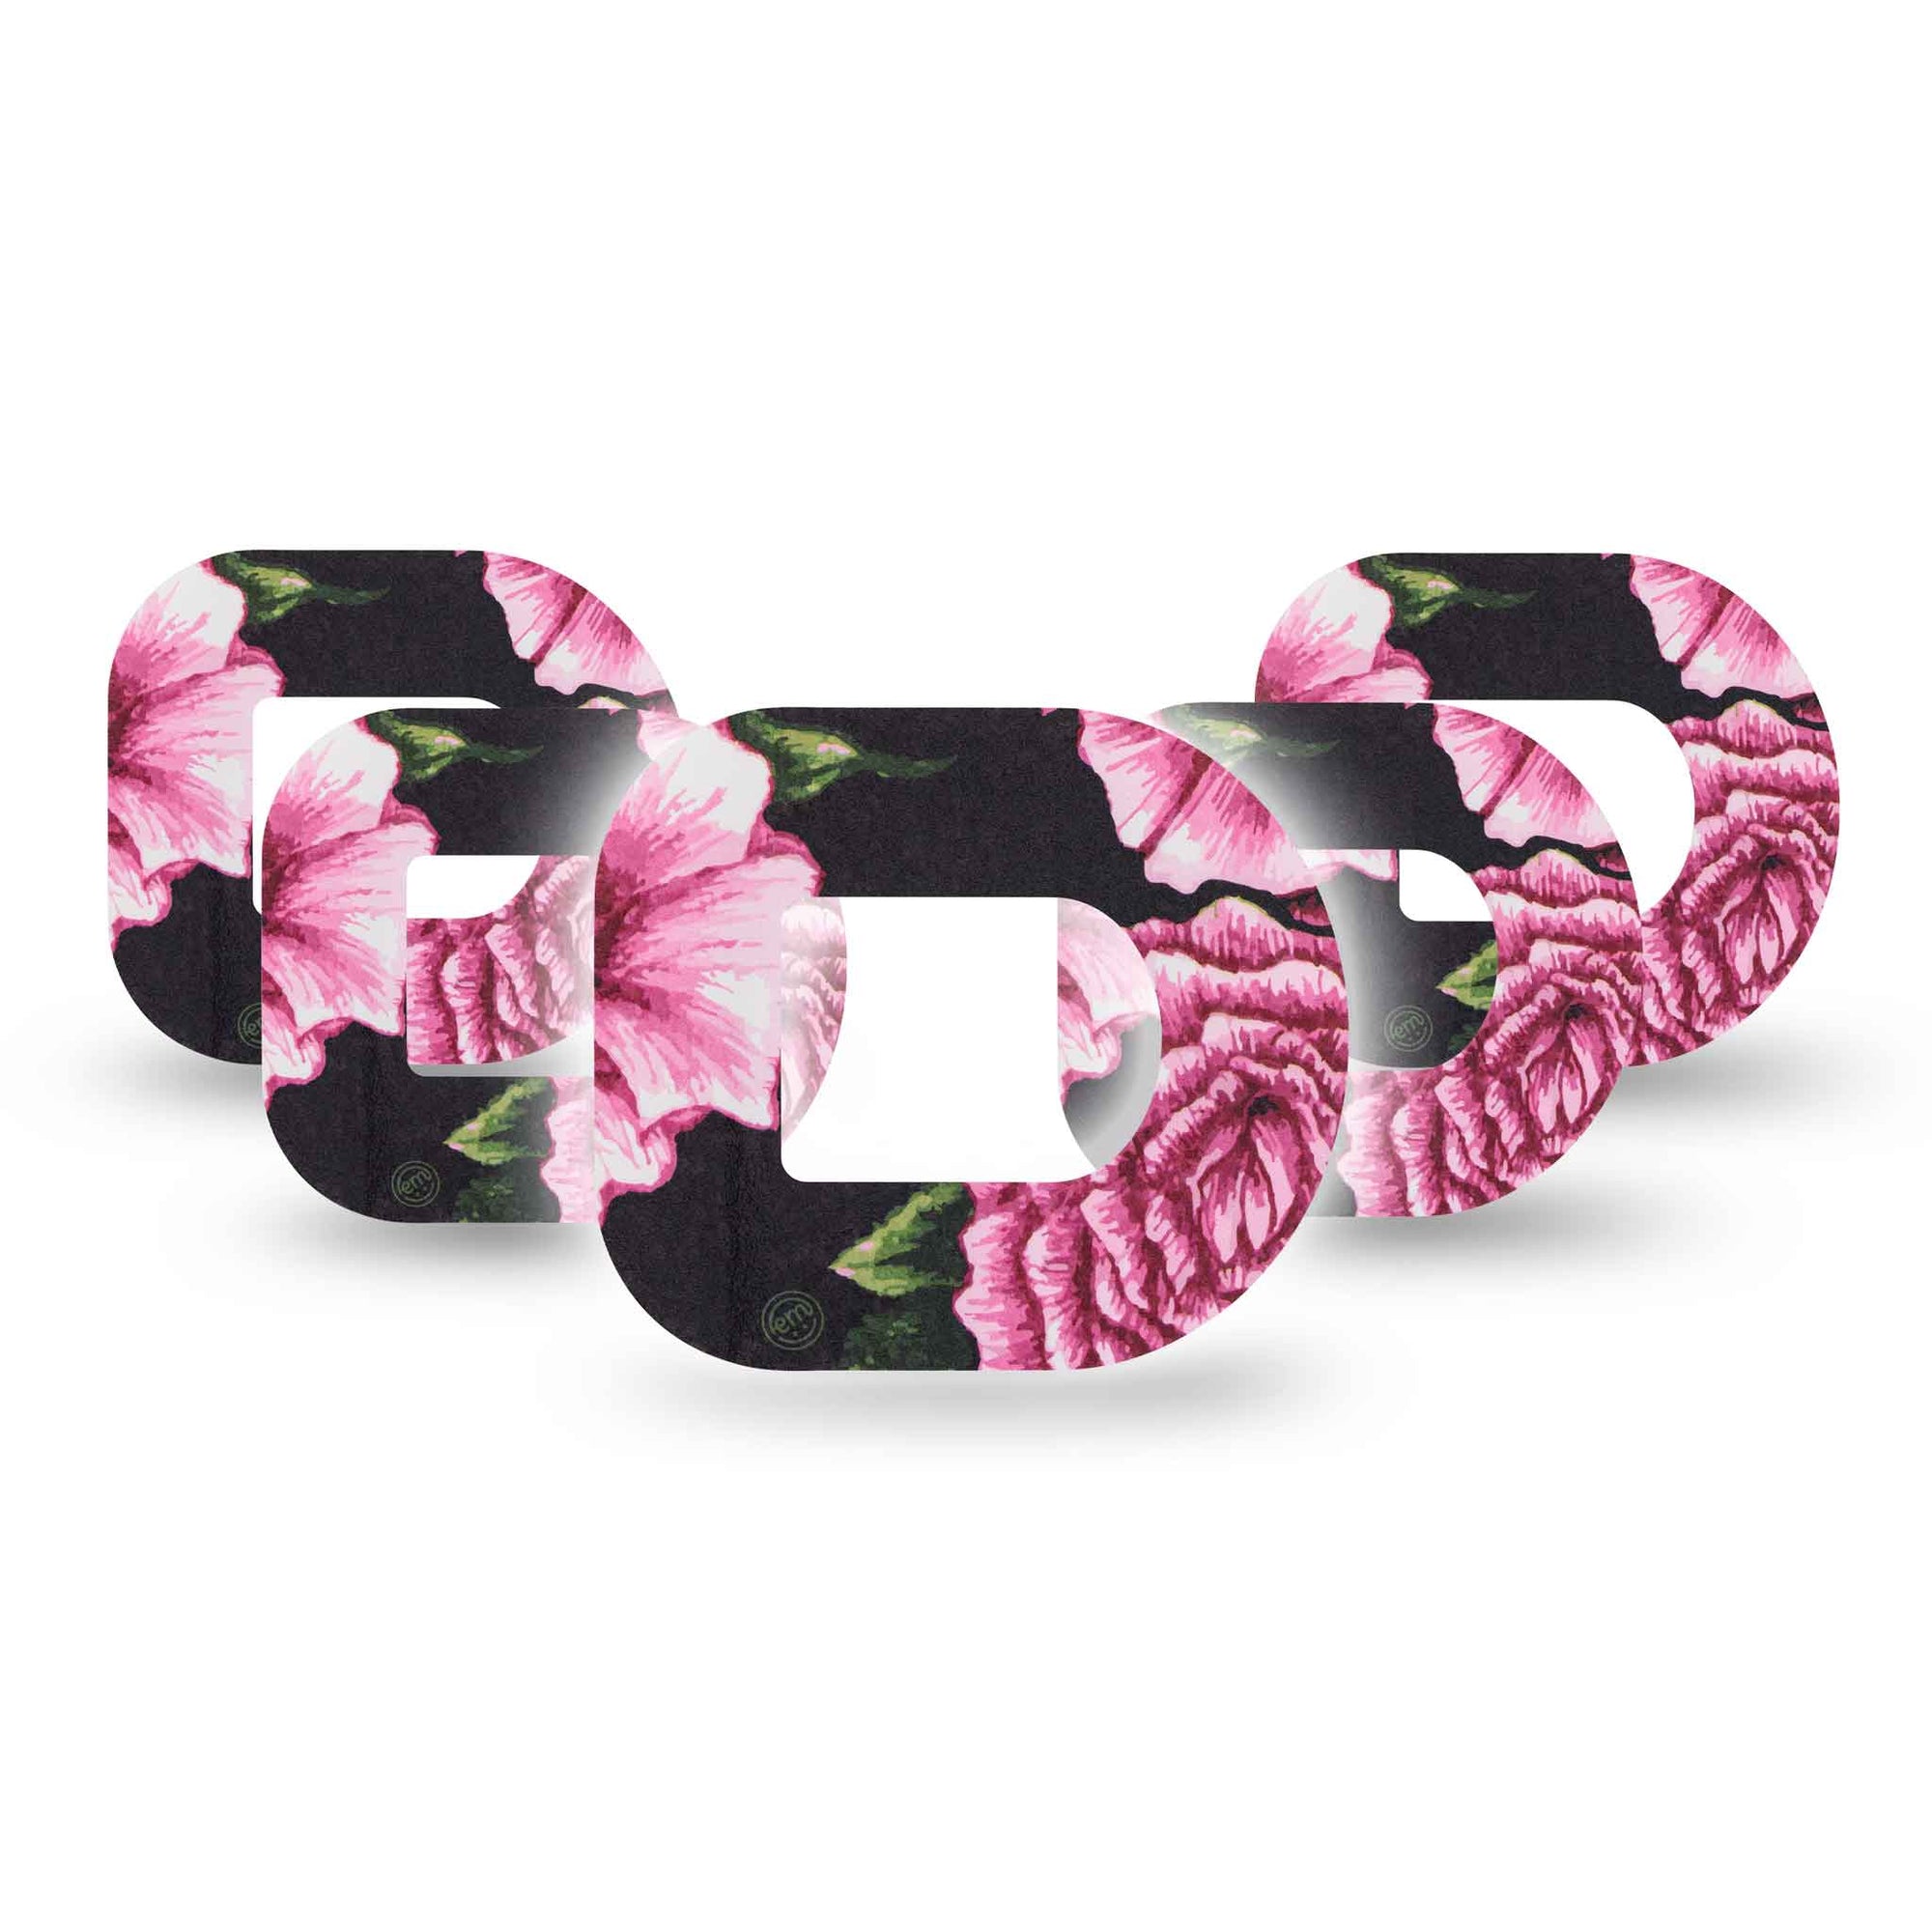 ExpressionMed Intricate Pink Flower Omnipod Tape 5-Pack